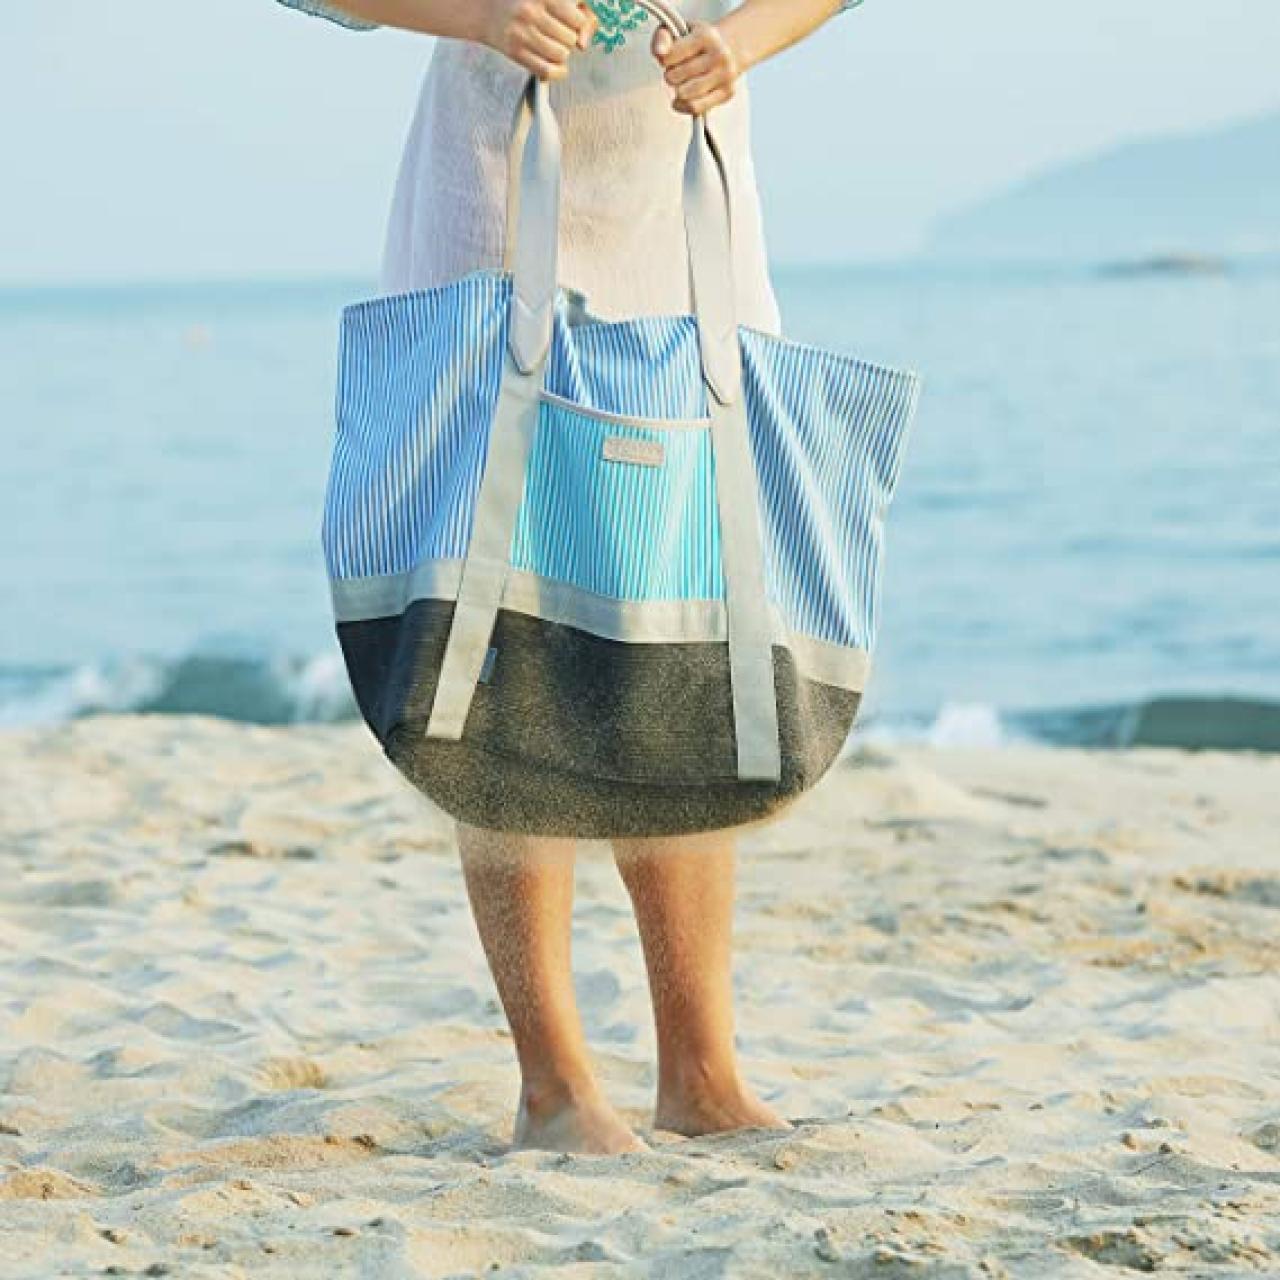 Best Beach Bags for Organizing All Your Summer Fun Must-Haves